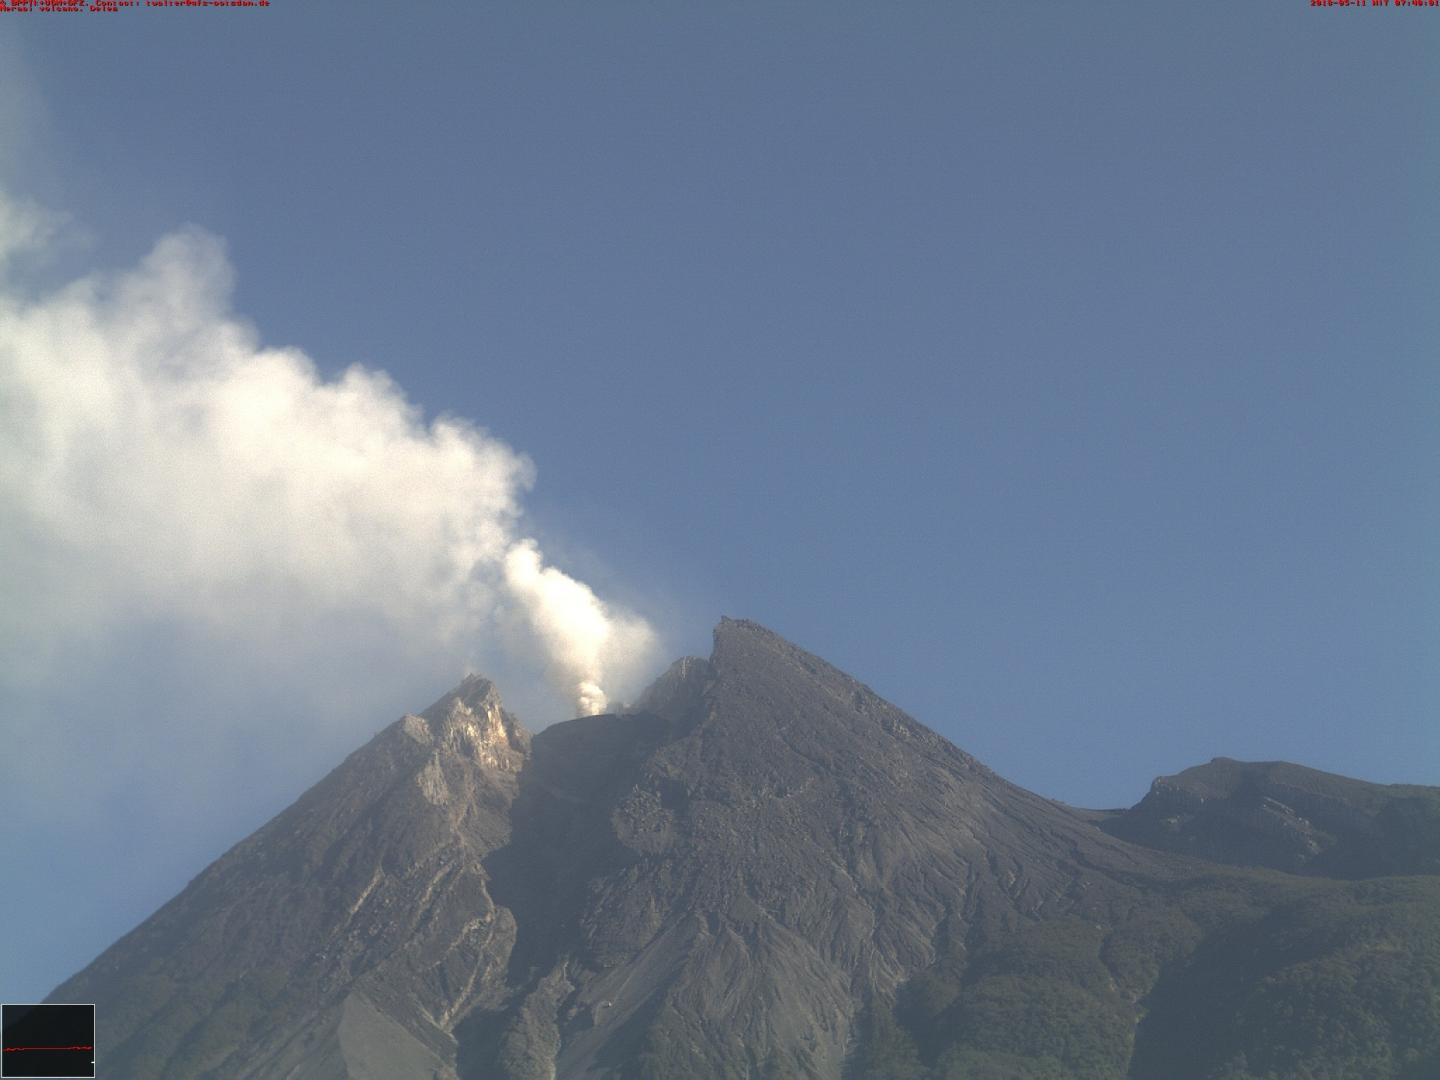 Eruption of the Merapi on 11 May 2018.